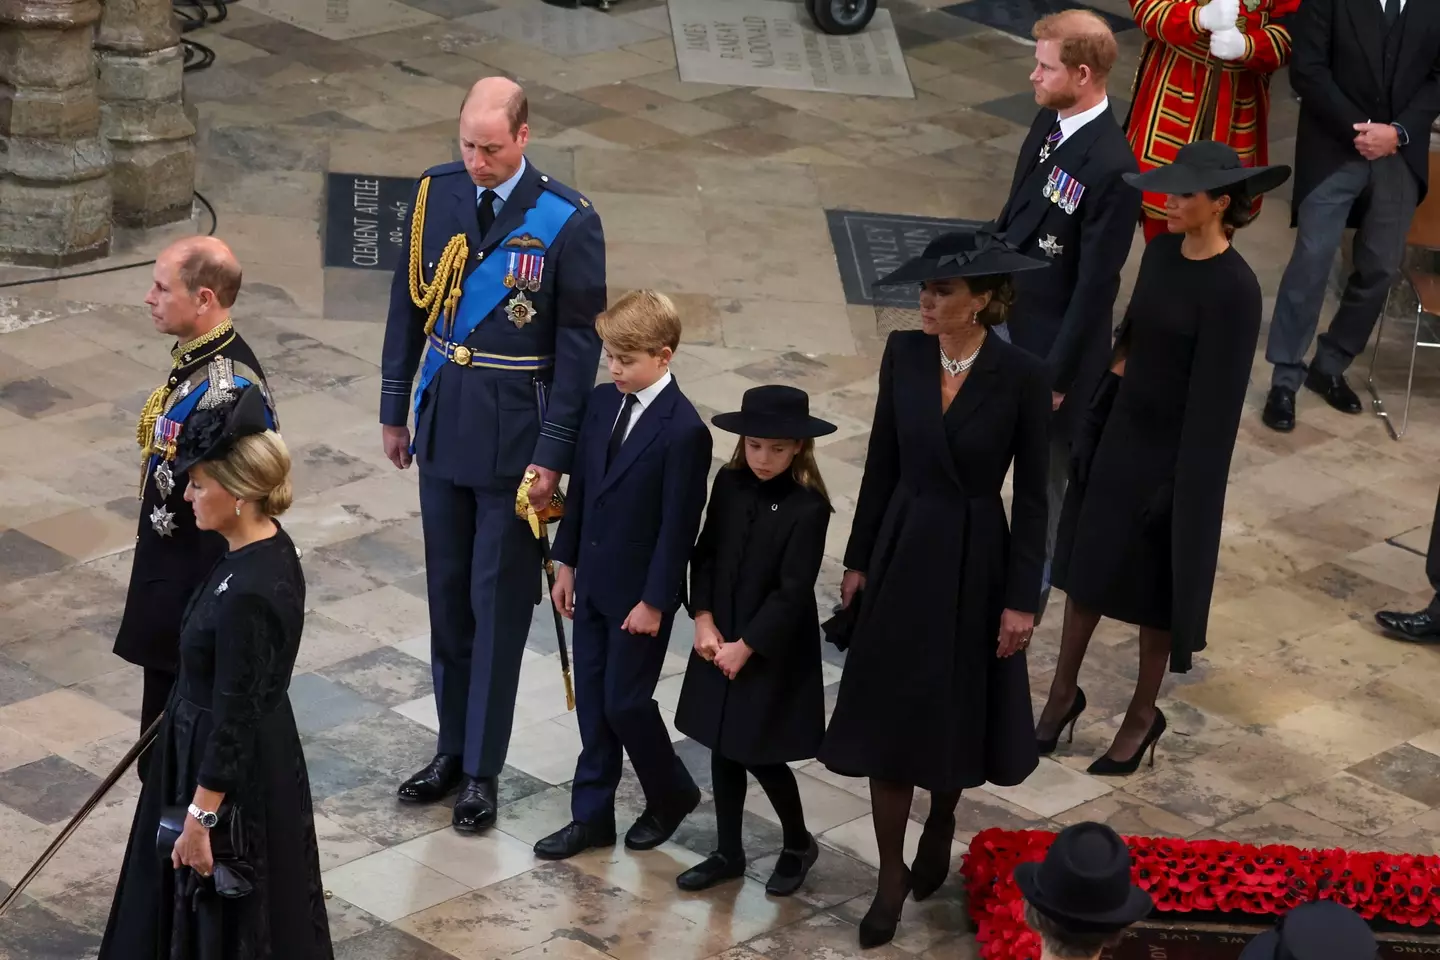 Royal staff will get the final say on which clips from the funeral can be kept in circulation.